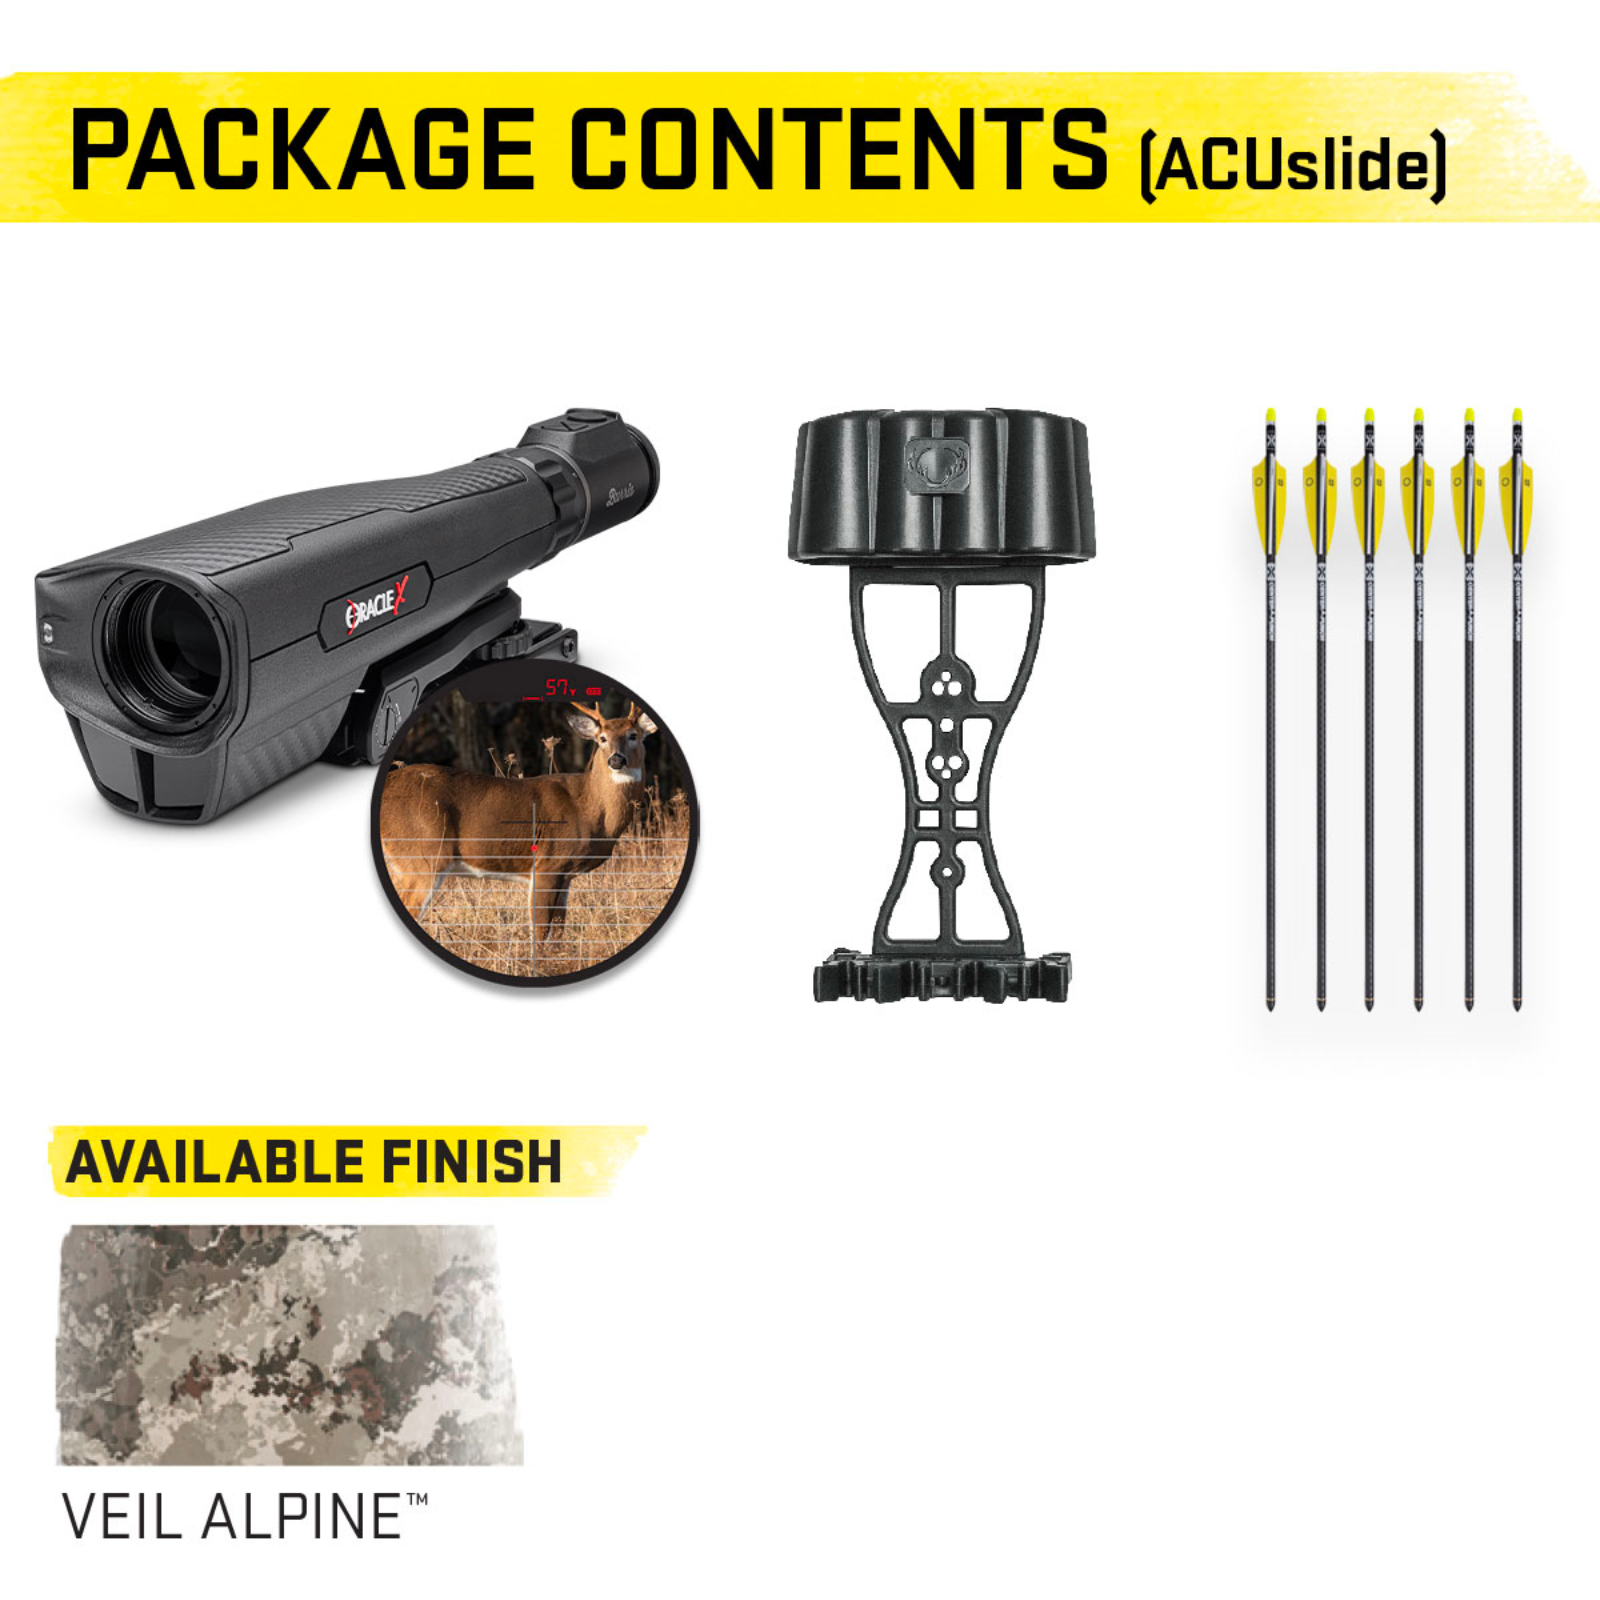 TenPoint Flatline 460 Oracle X Compound Crossbow Package